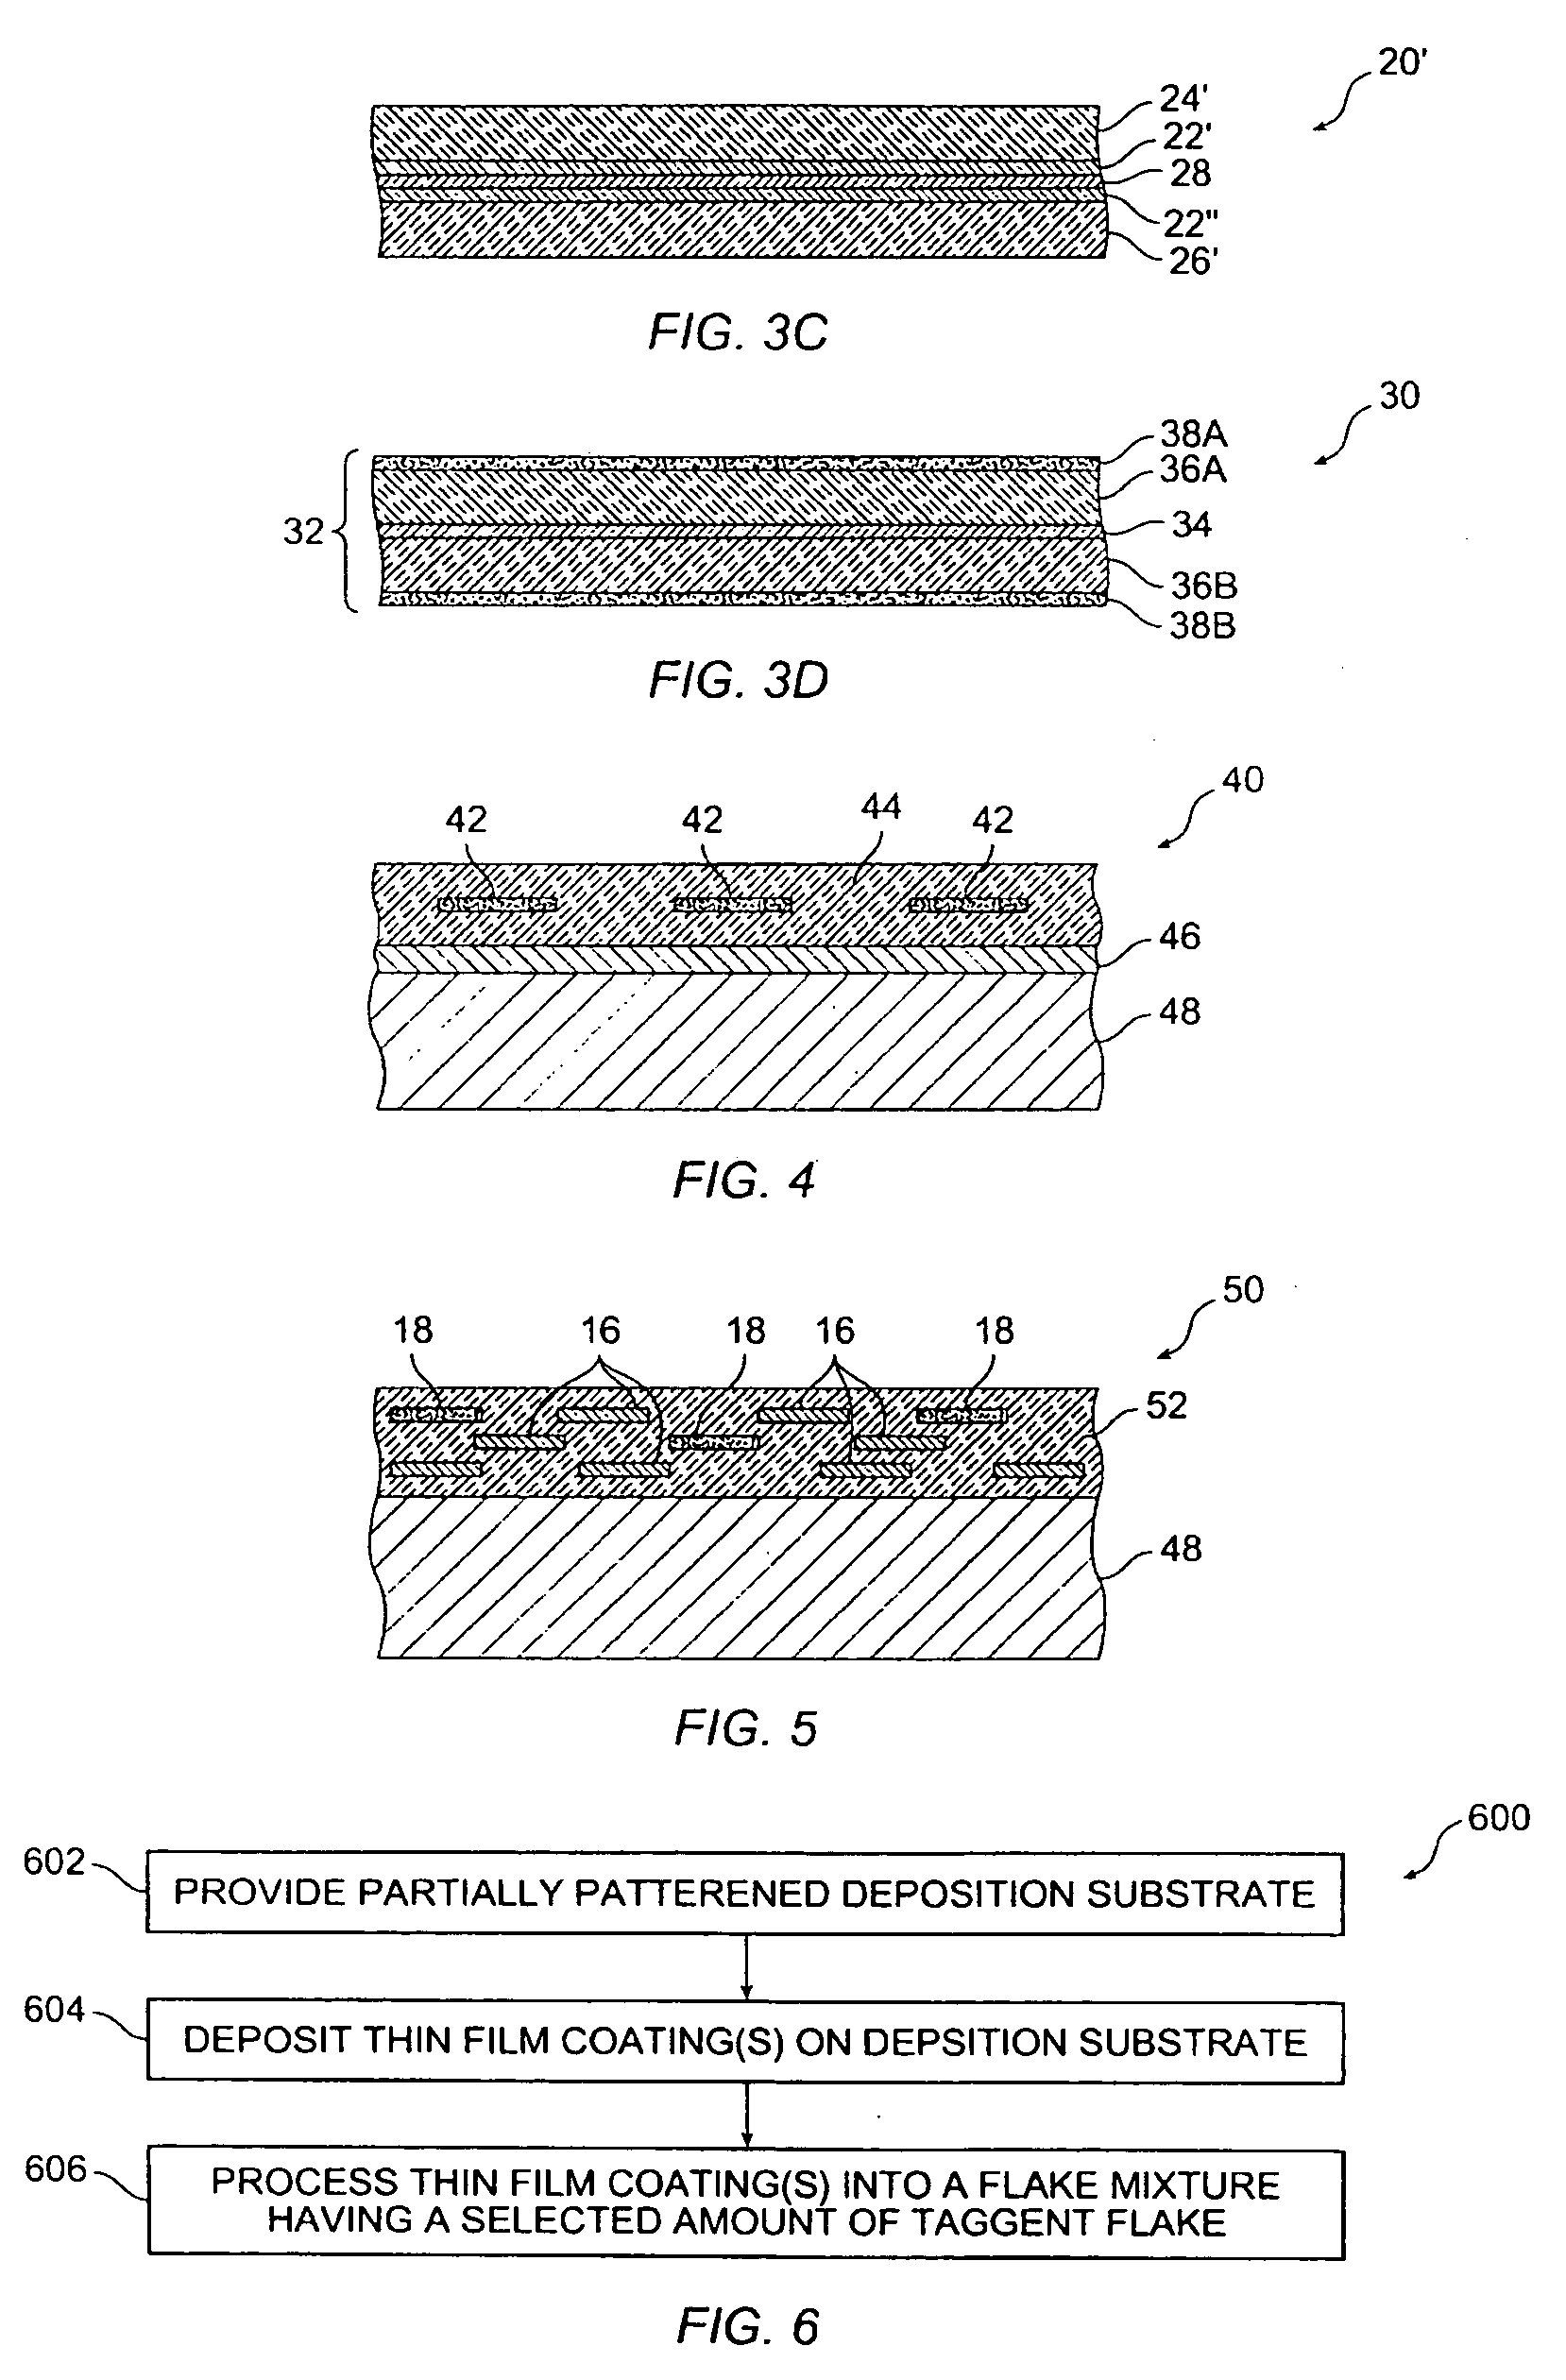 Provision of frames or borders around opaque flakes for covert security applications